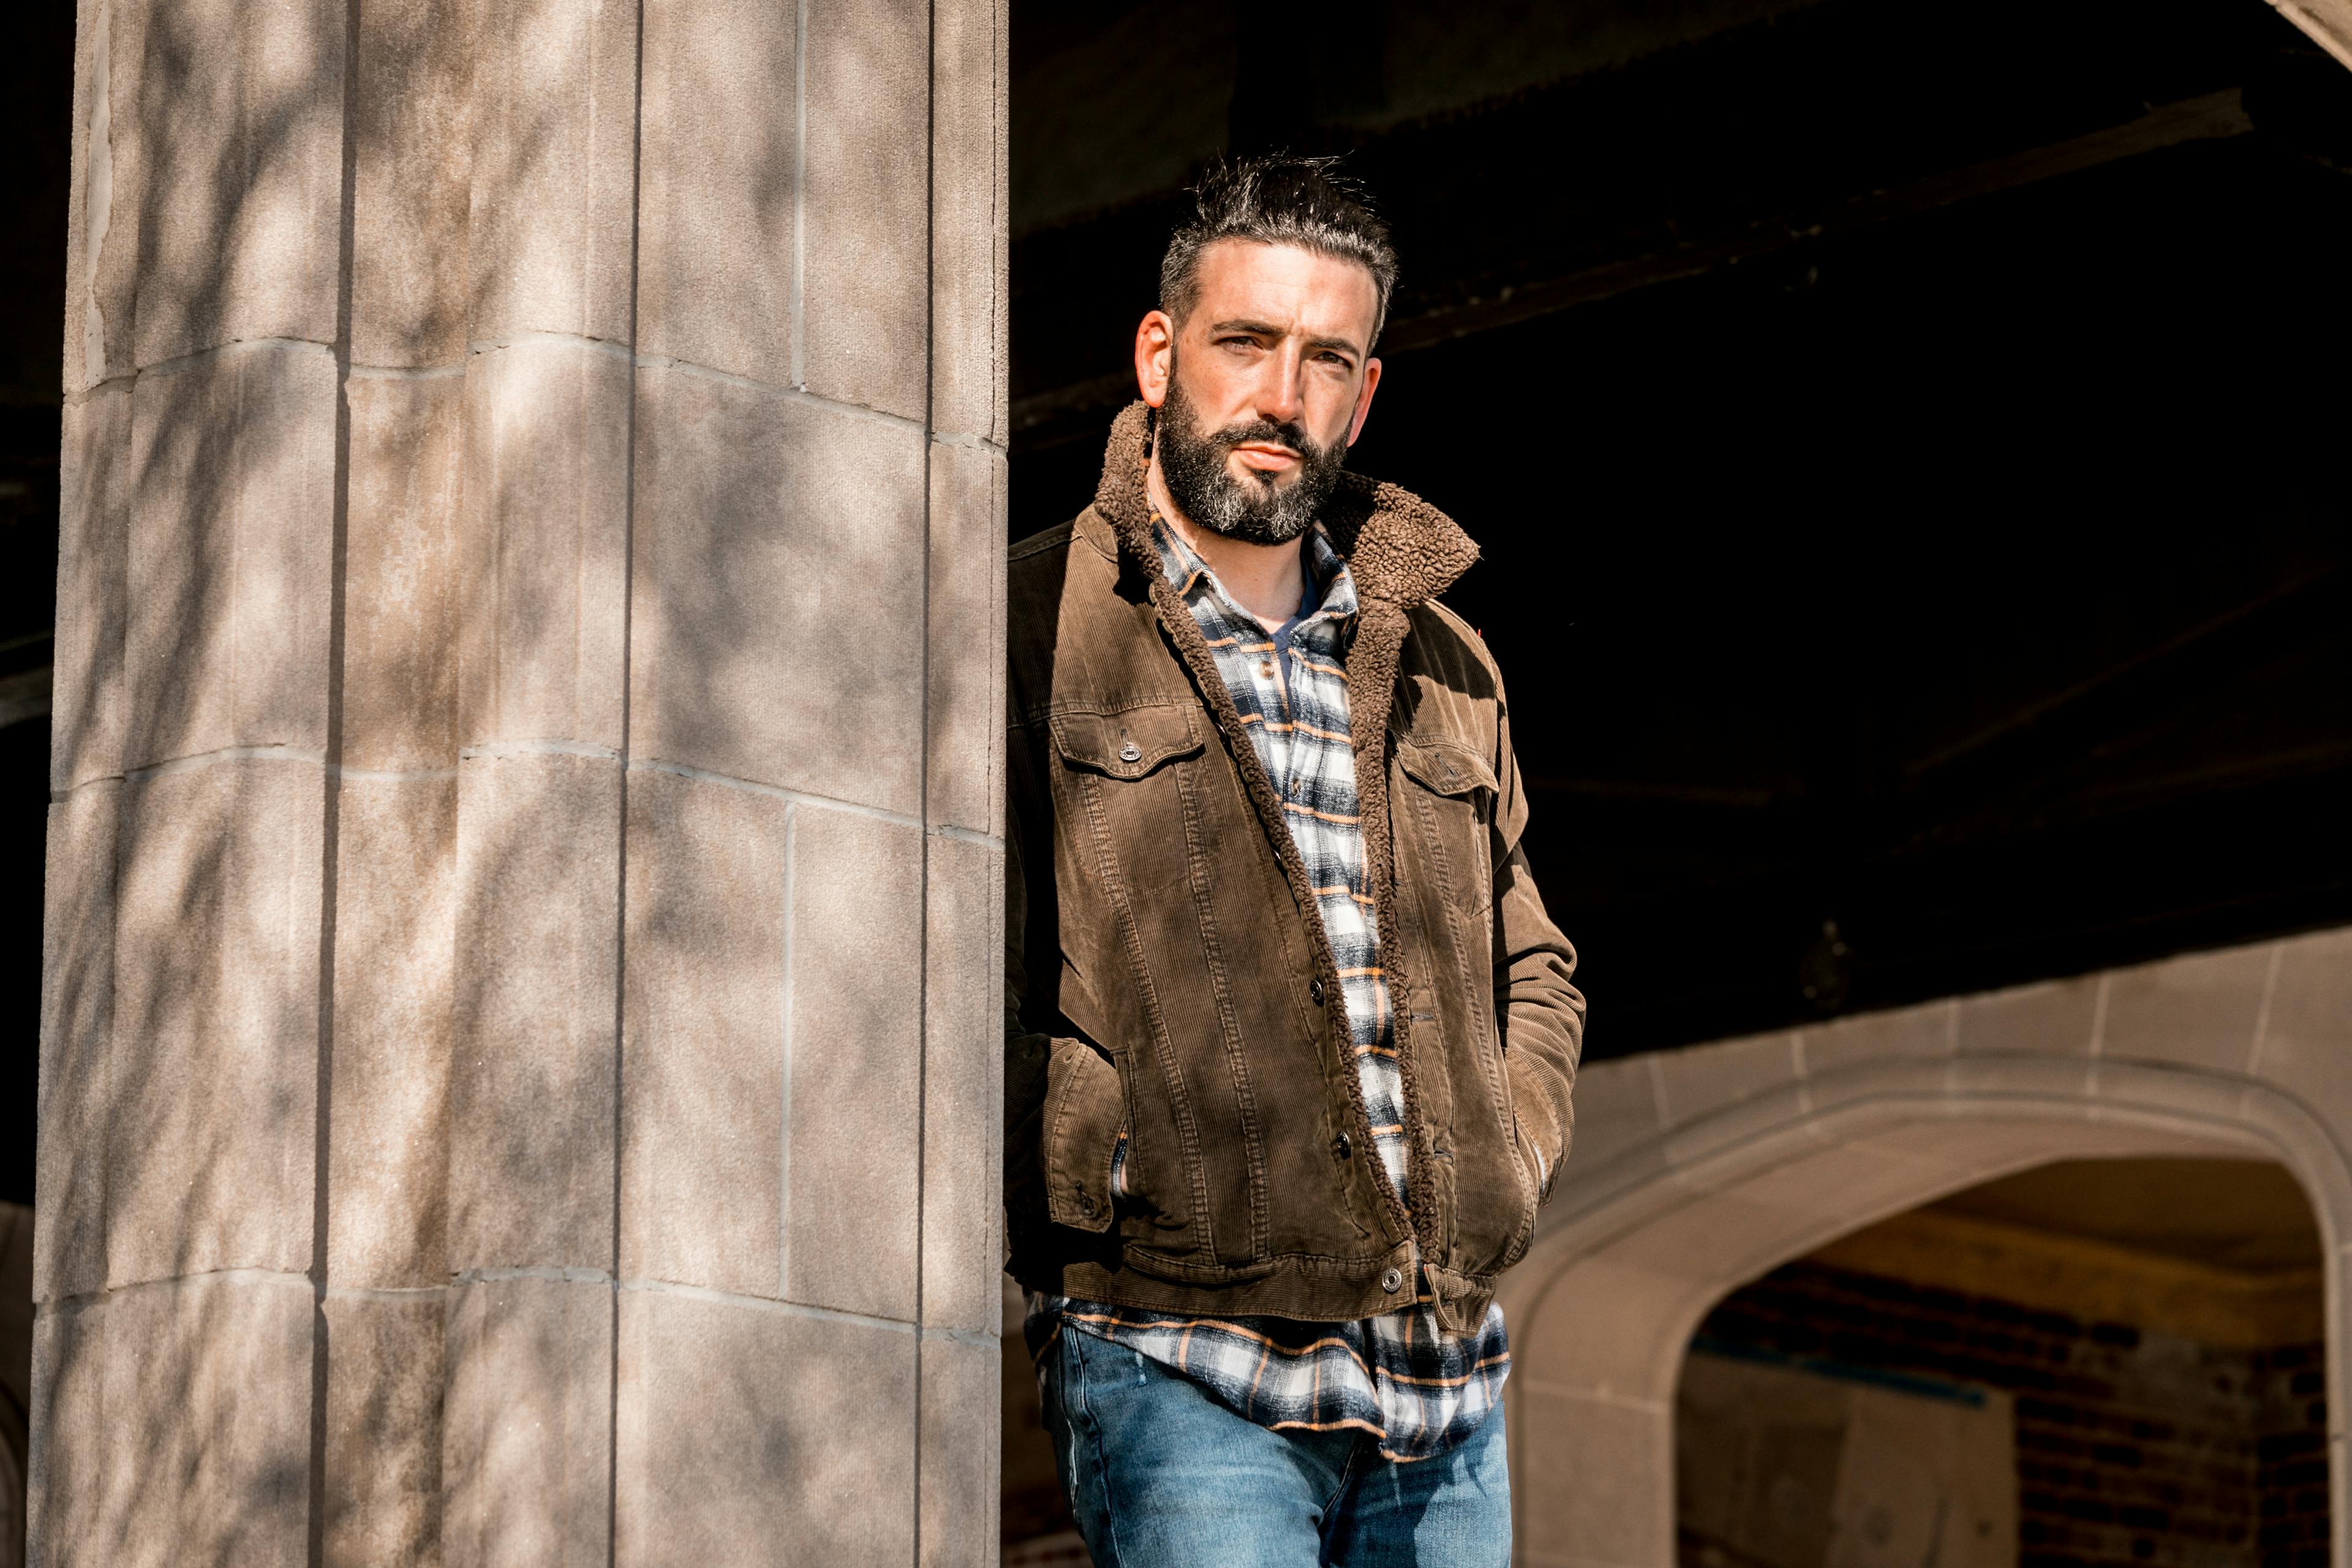 Man leaning against a column with a thoughtful expression in a casual jacket and plaid shirt.